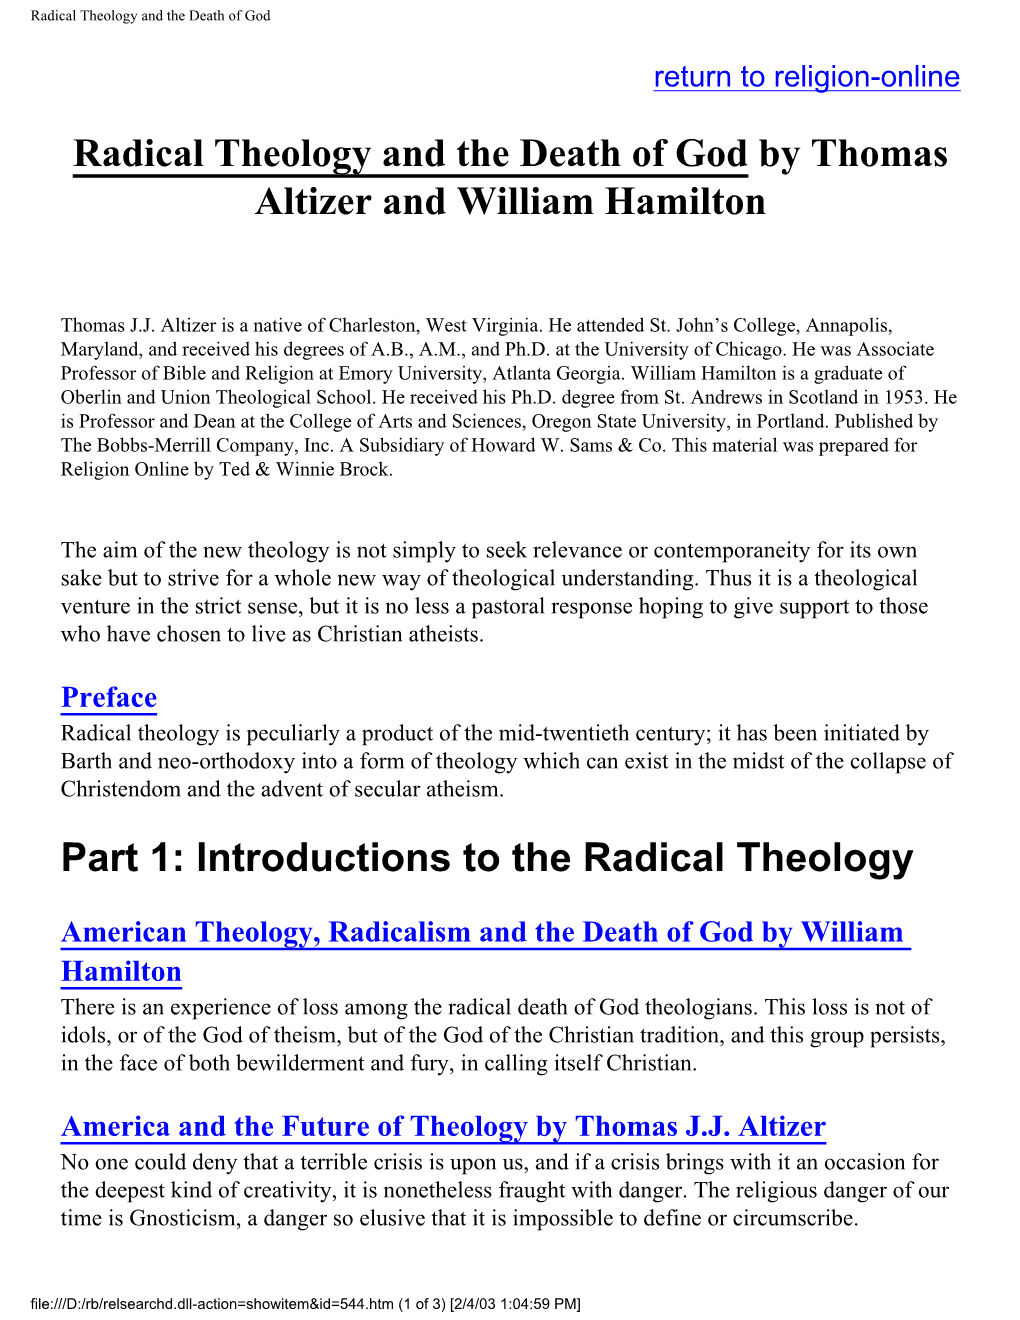 Radical Theology and the Death of God by Thomas Altizer and William Hamilton